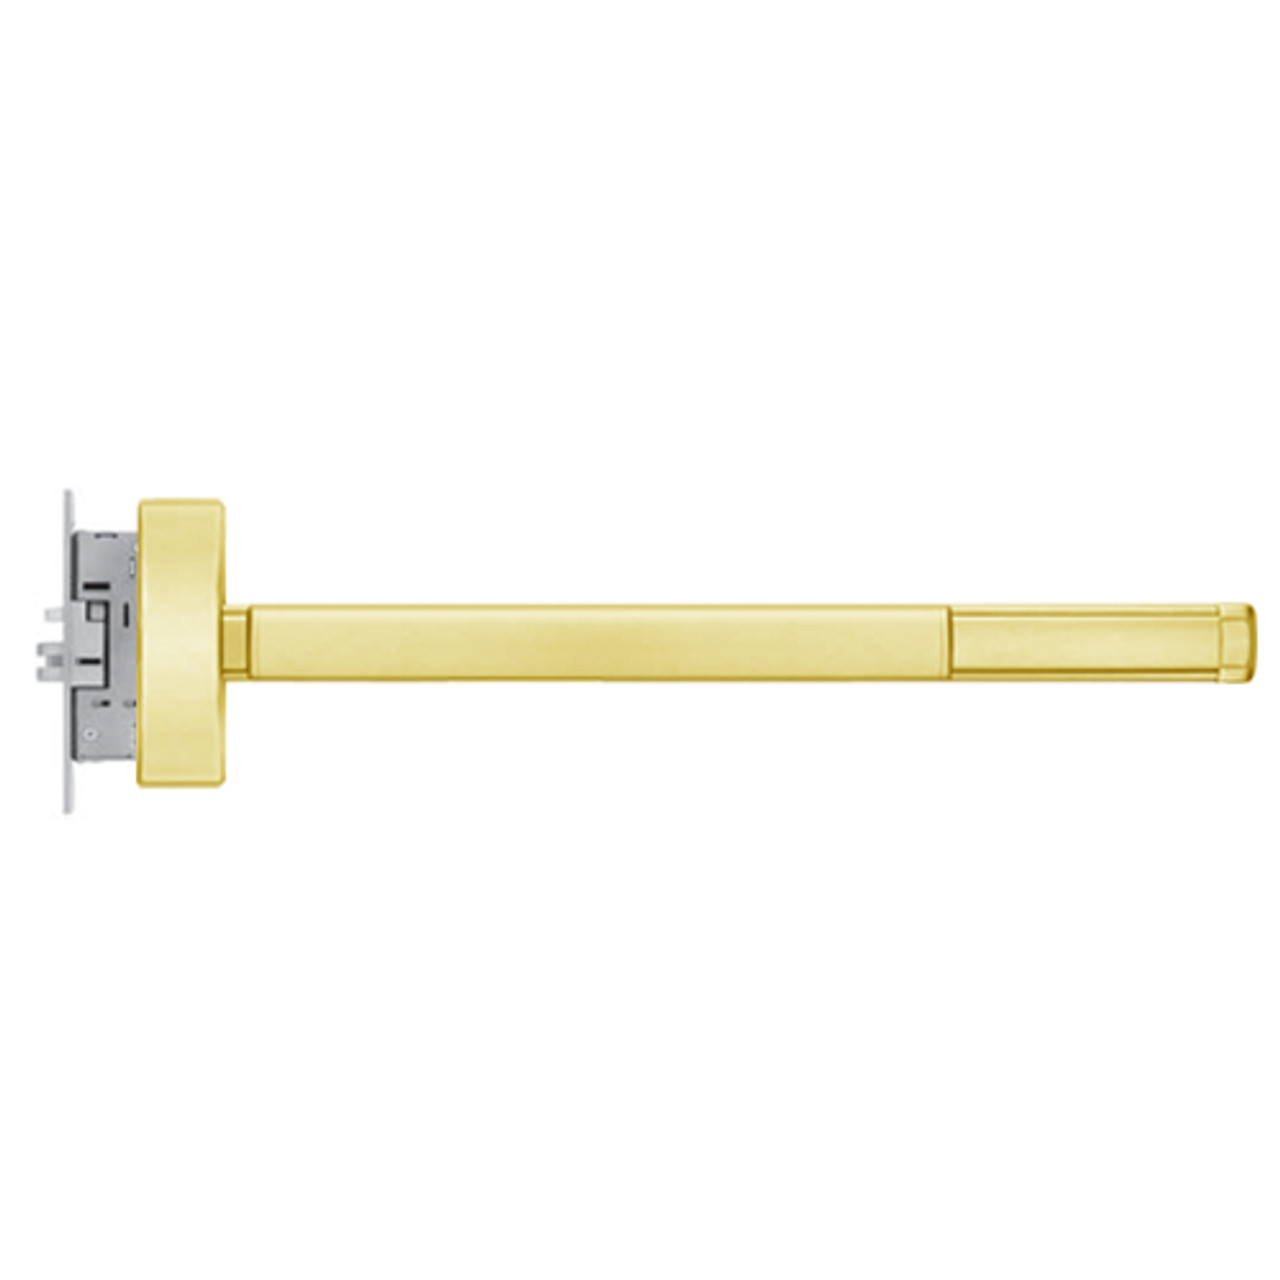 2302-RHR-605-36 PHI 2300 Series Non Fire Rated Apex Mortise Exit Device Prepped for Dummy Trim in Bright Brass Finish